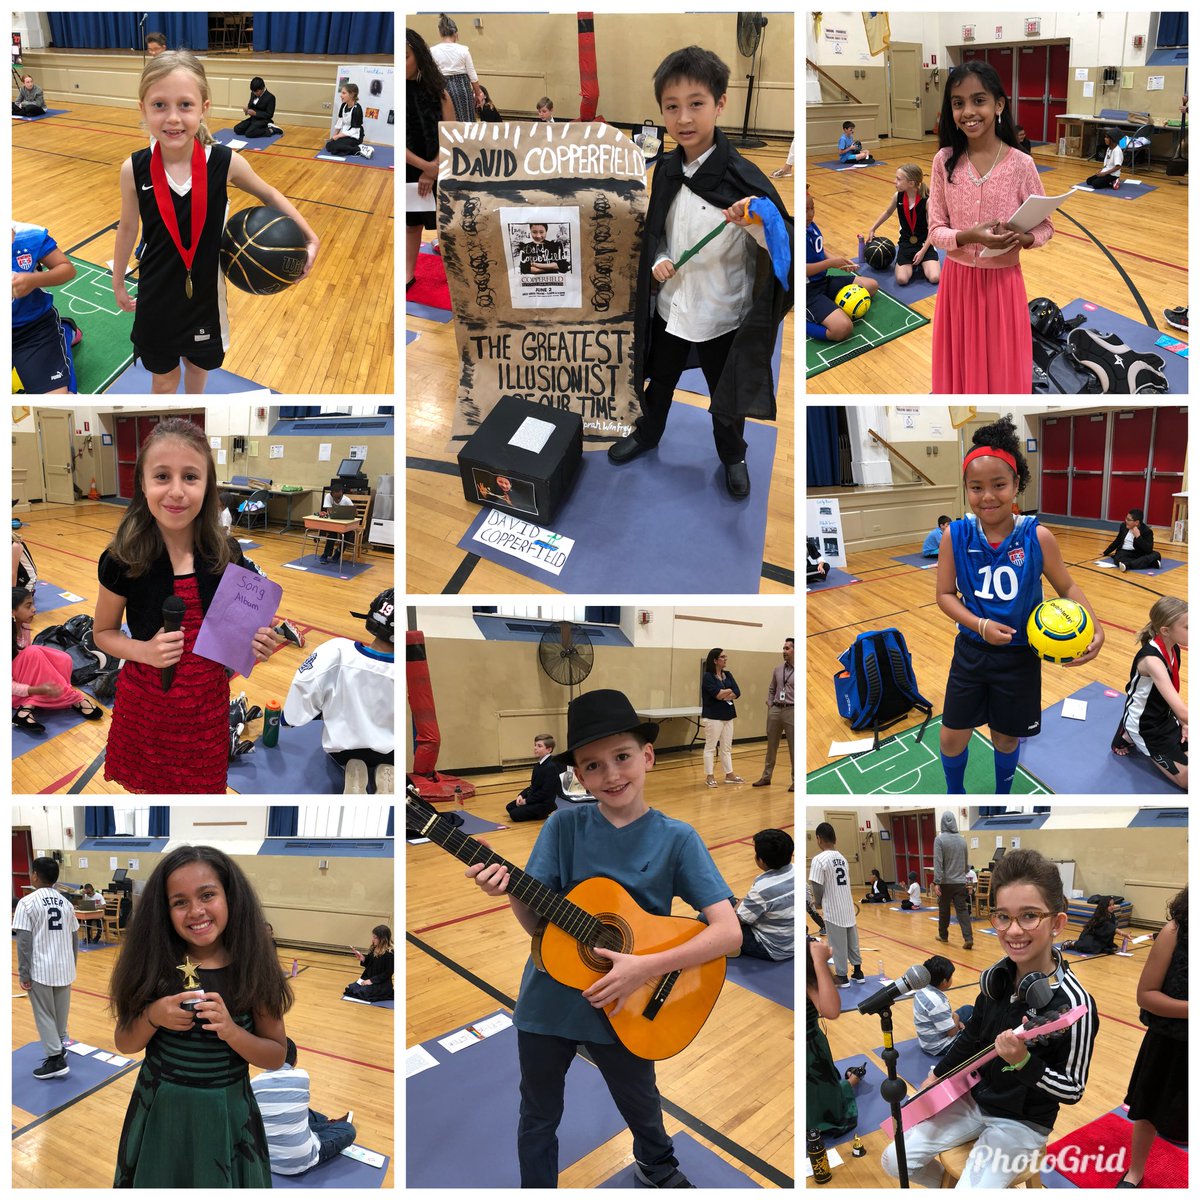 Proud of our kids! Great job today!! They did an amazing job bringing their famous New Jerseyan to life. #waxmuseum #annedonovan #davidcopperfield #zoesaldana #katepierson #annehathaway #paulsimon #carlilloyd #charlieputh